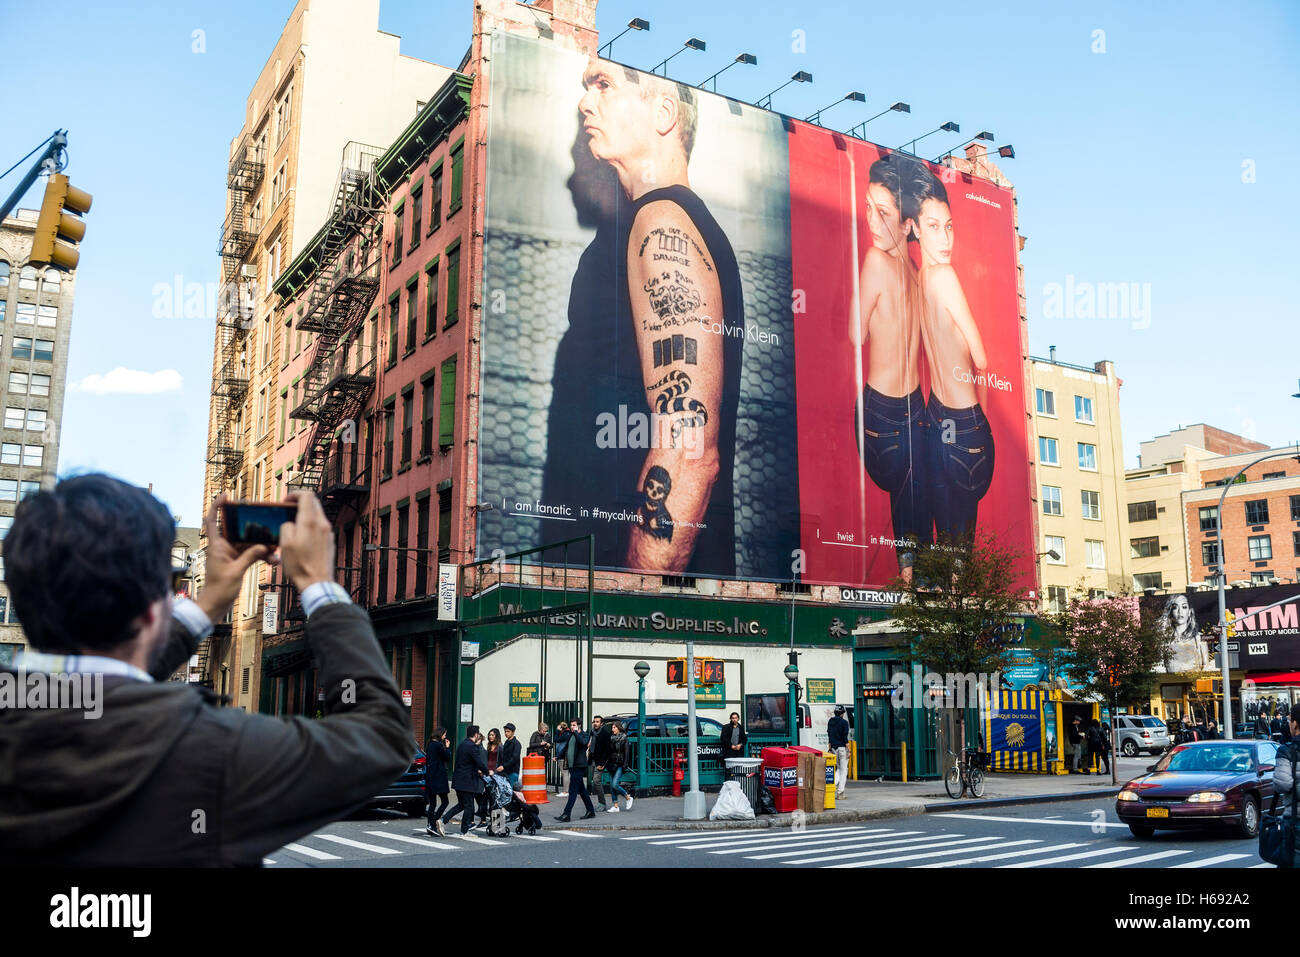 New York, USA 23 October 2016 - Man taking a photo of billboard advertising  for Calvin Klein. featuring Henry Rollins and Bella Hadid ©Stacy Walsh  Rosenstock Stock Photo - Alamy